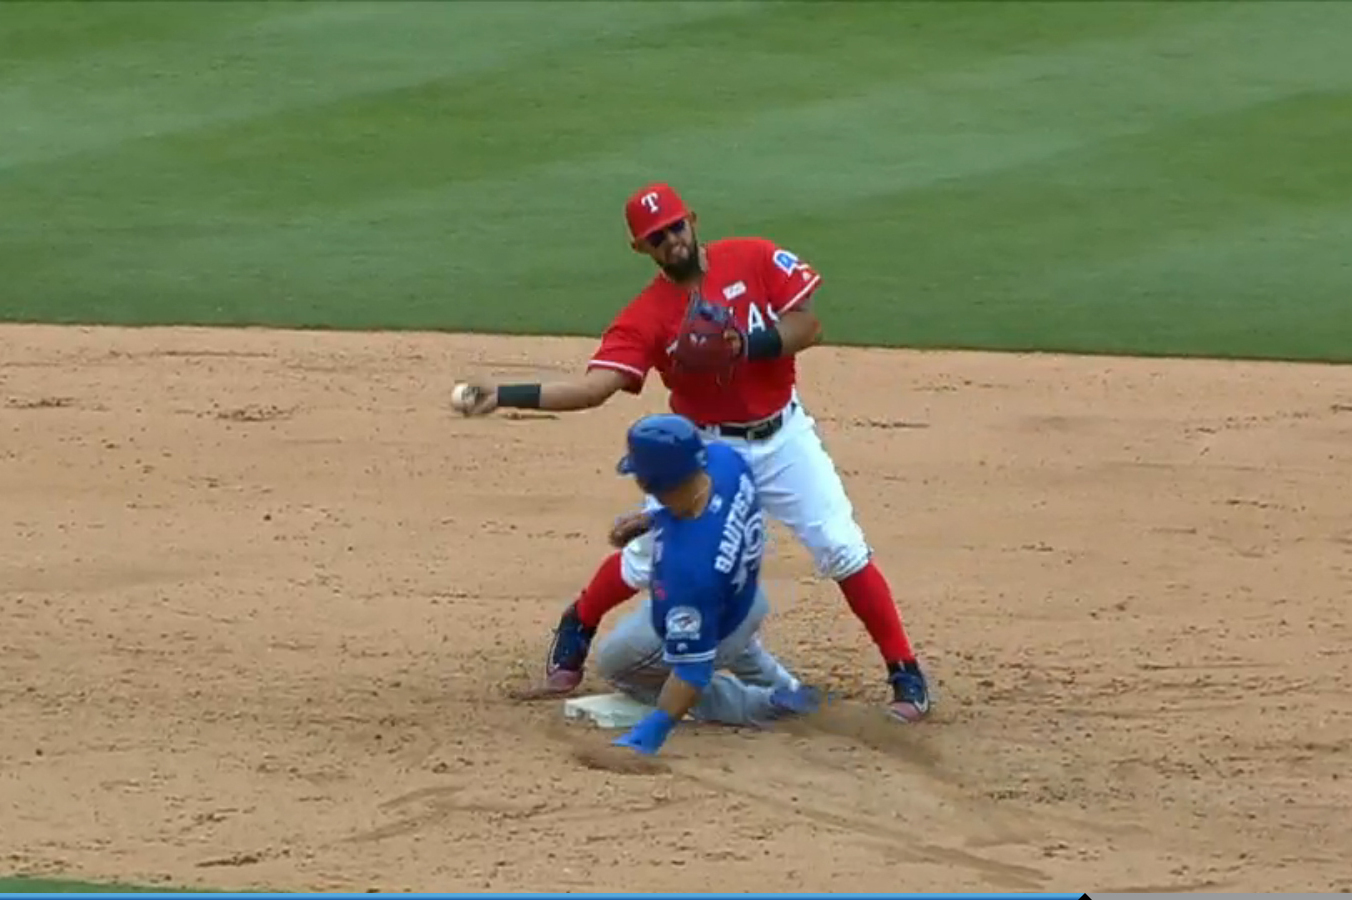 On this day, two years ago, Rougned Odor punched José Bautista and